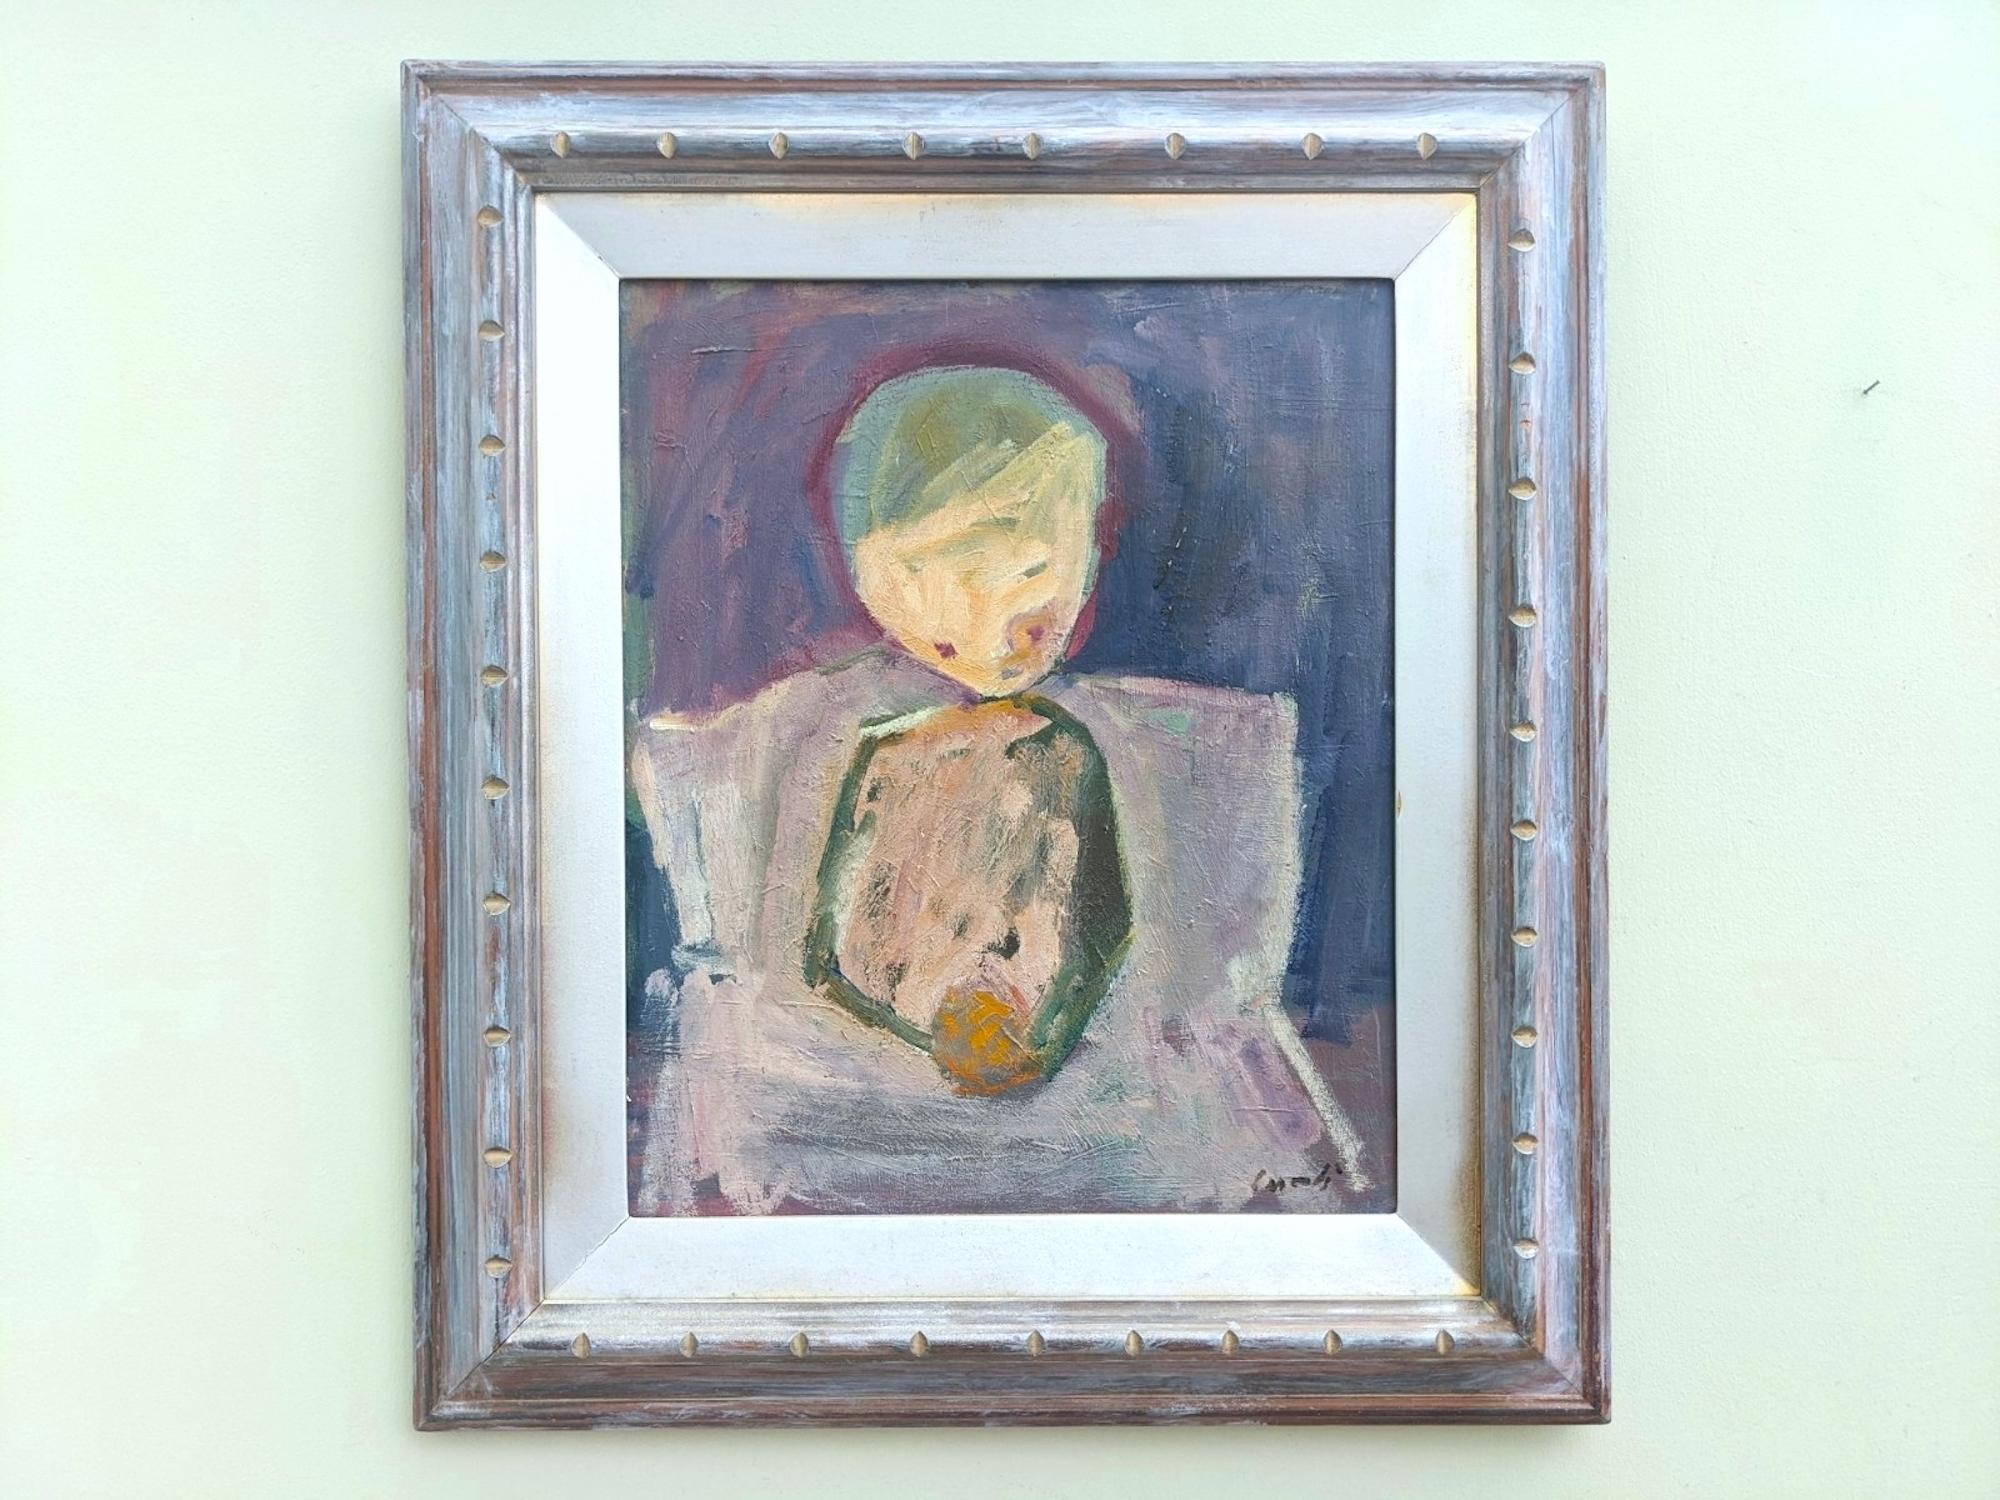 1943 Vintage Swedish Abstract Figurative Framed Oil Painting -Portrait in Purple - Gray Abstract Painting by Unknown